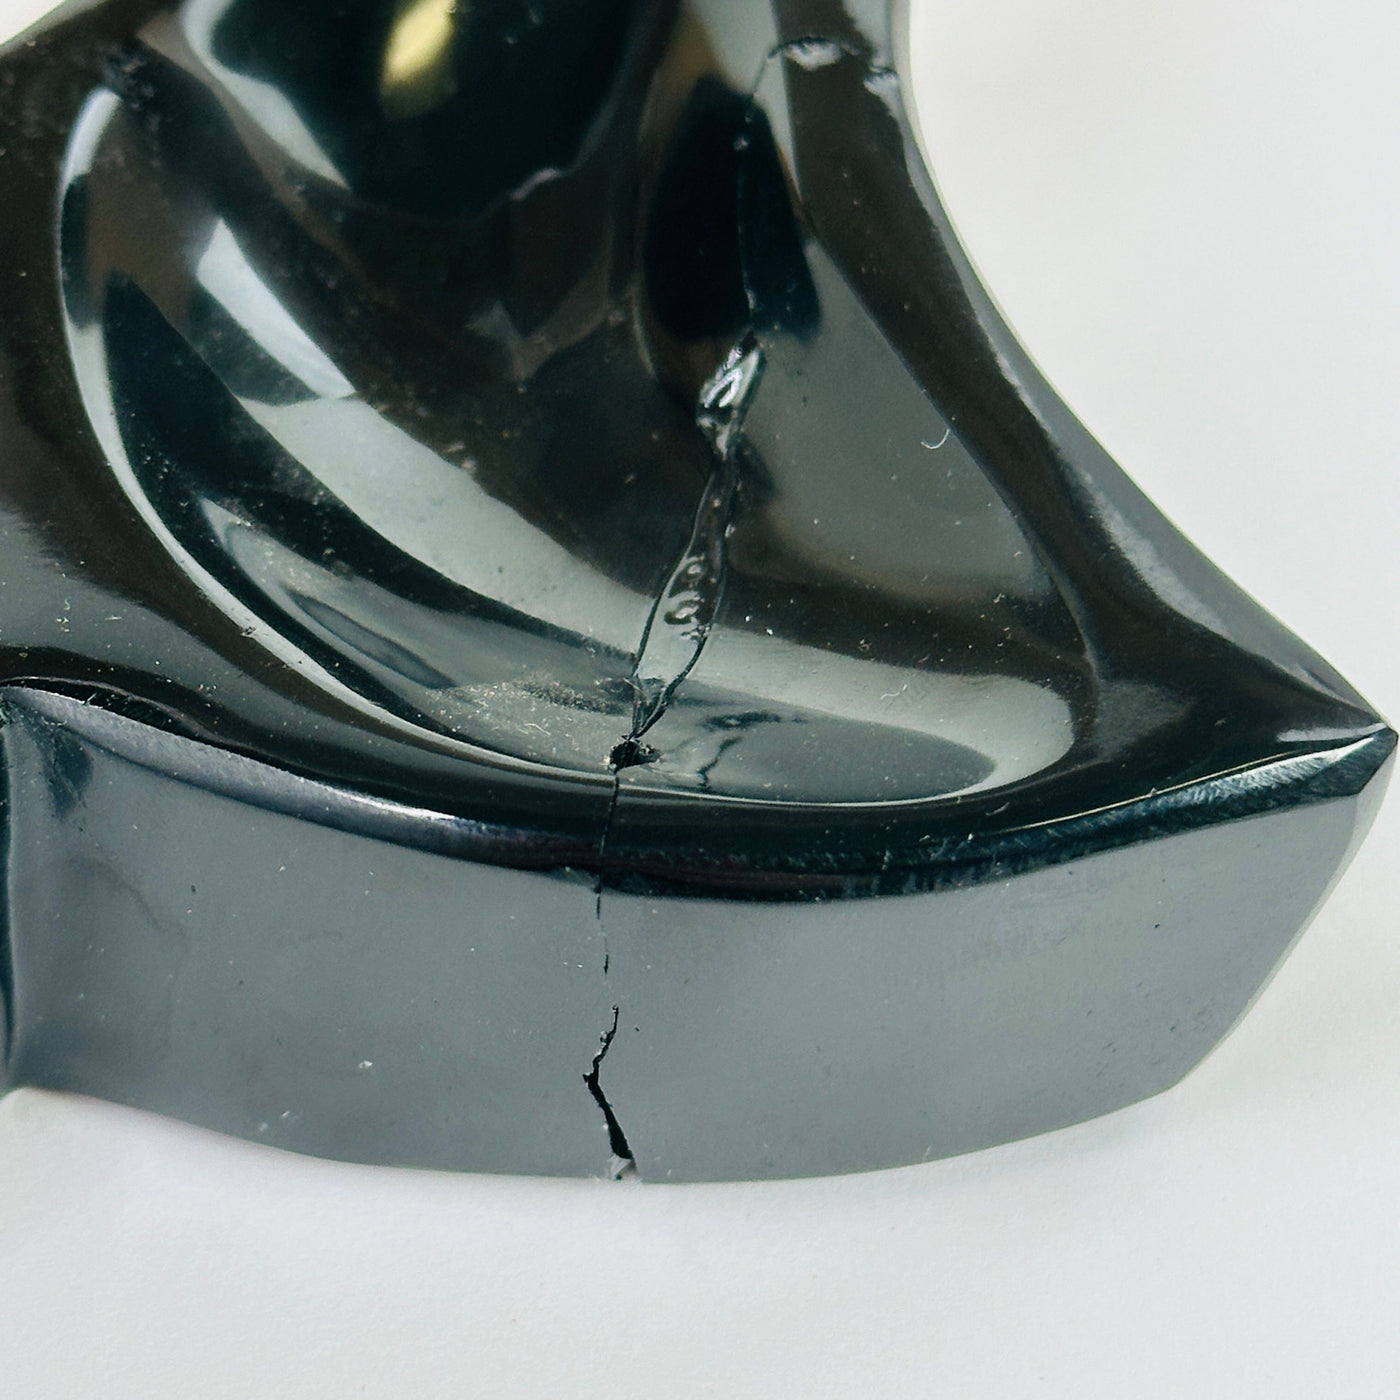 up close shot of glued part of obsidian moon bowl